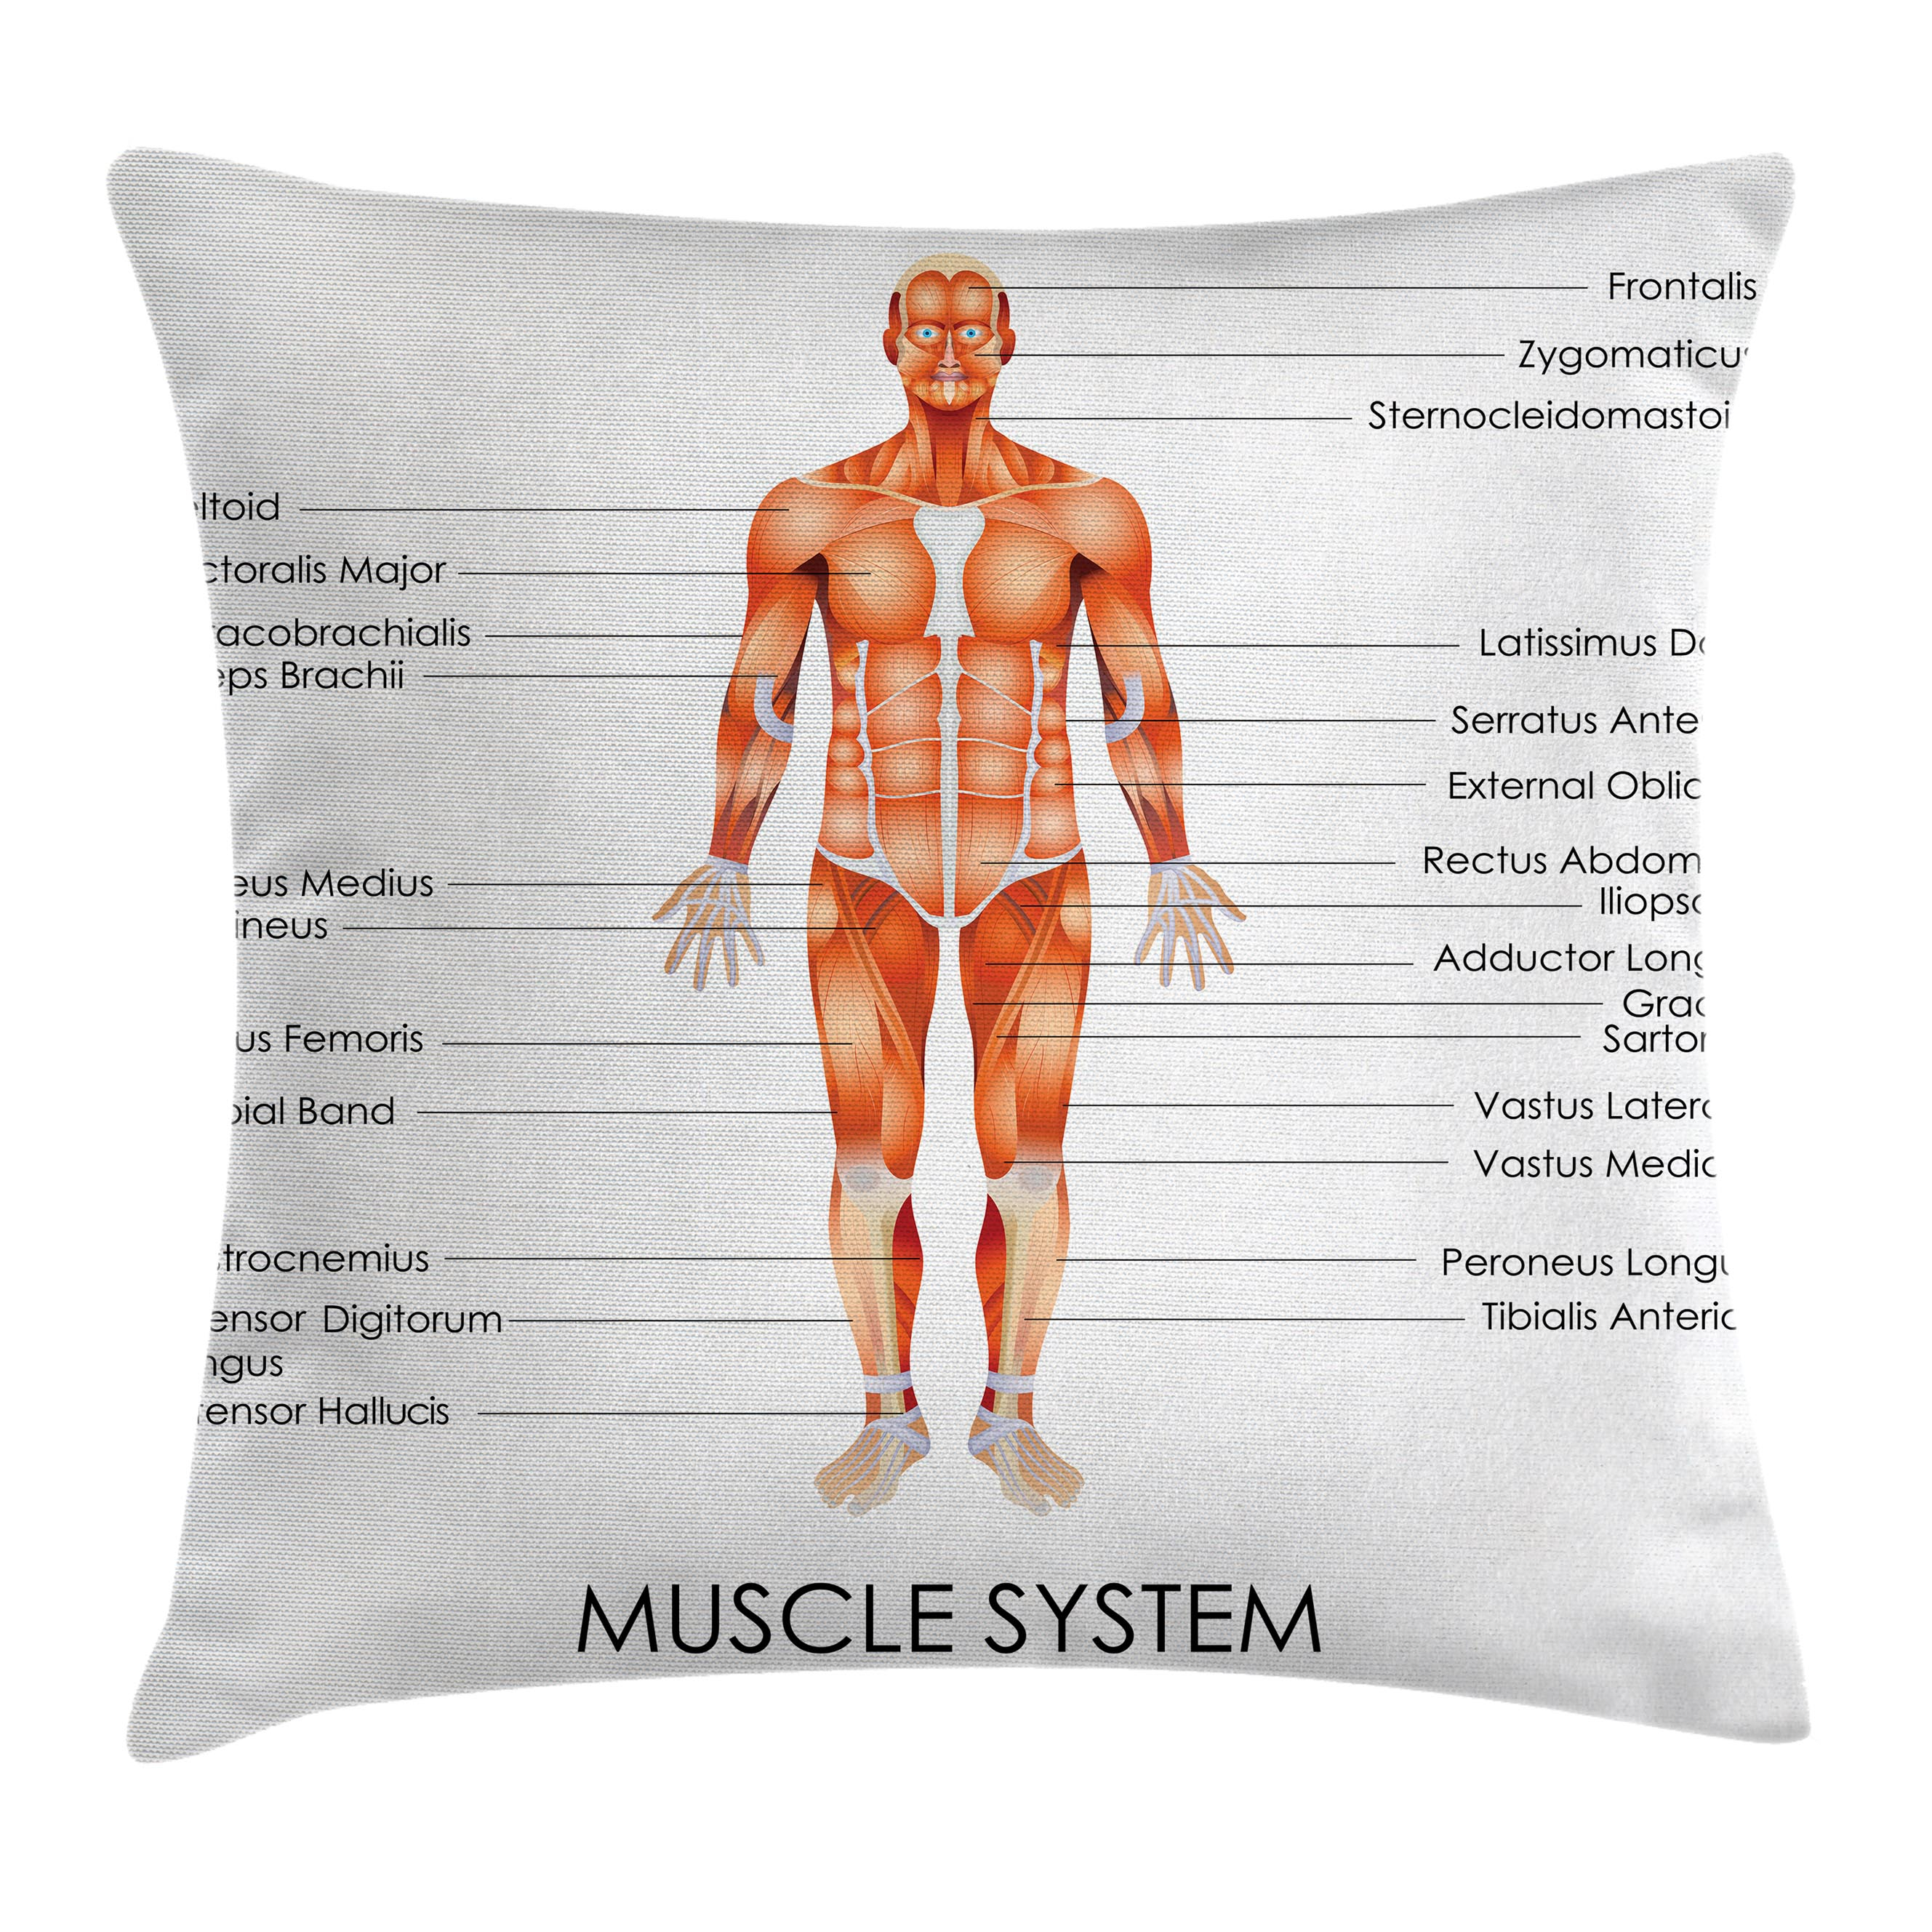 Muscular System Diagram Human Anatomy Throw Pillow Cushion Cover Muscle System Diagram Of Man Body Features Biological Elements Medical Heath Image Decorative Square Accent